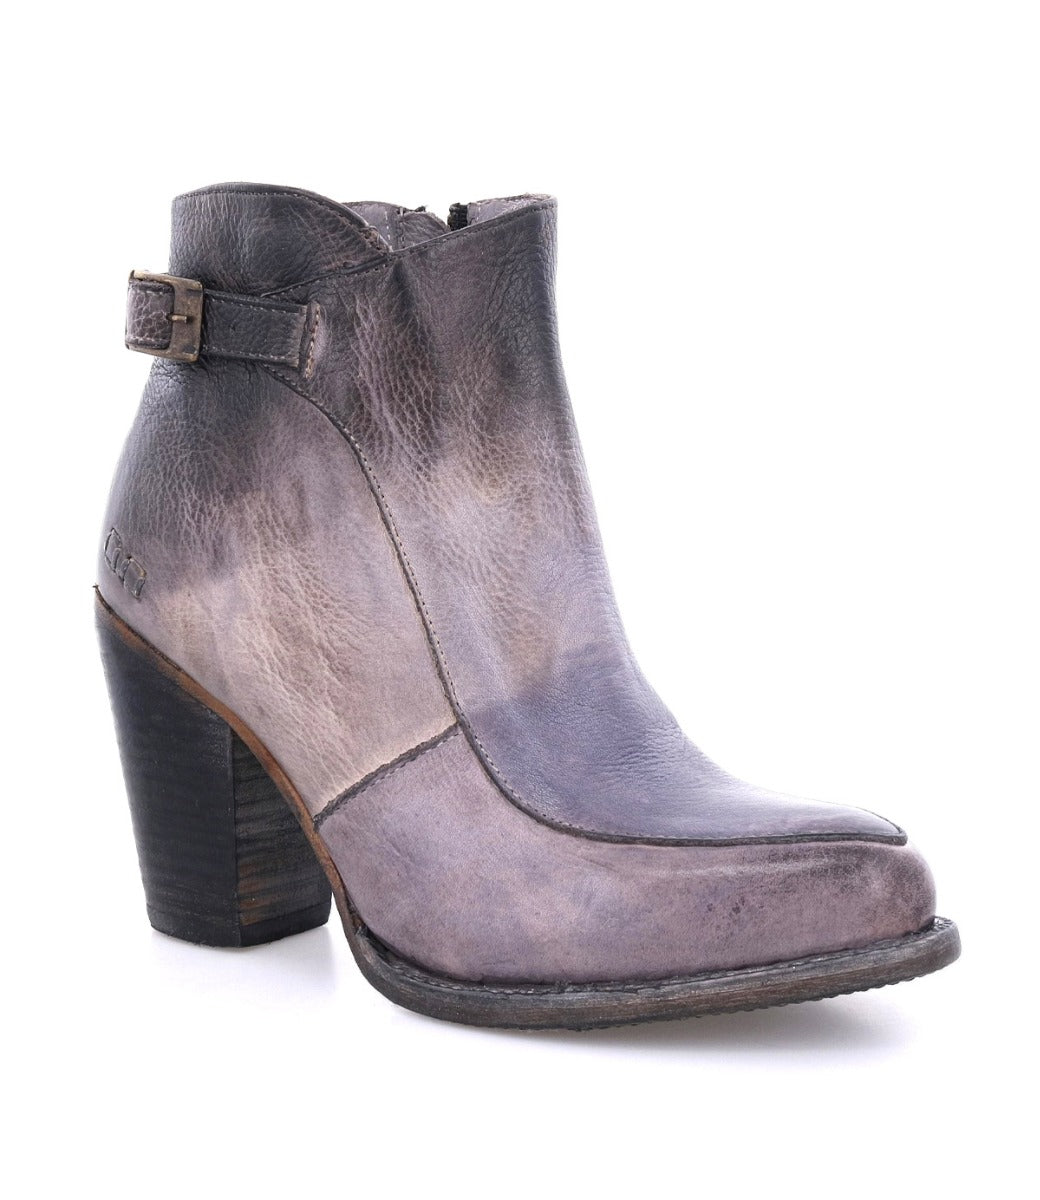 A women's Isla ankle boot with a wooden heel made by Bed Stu.